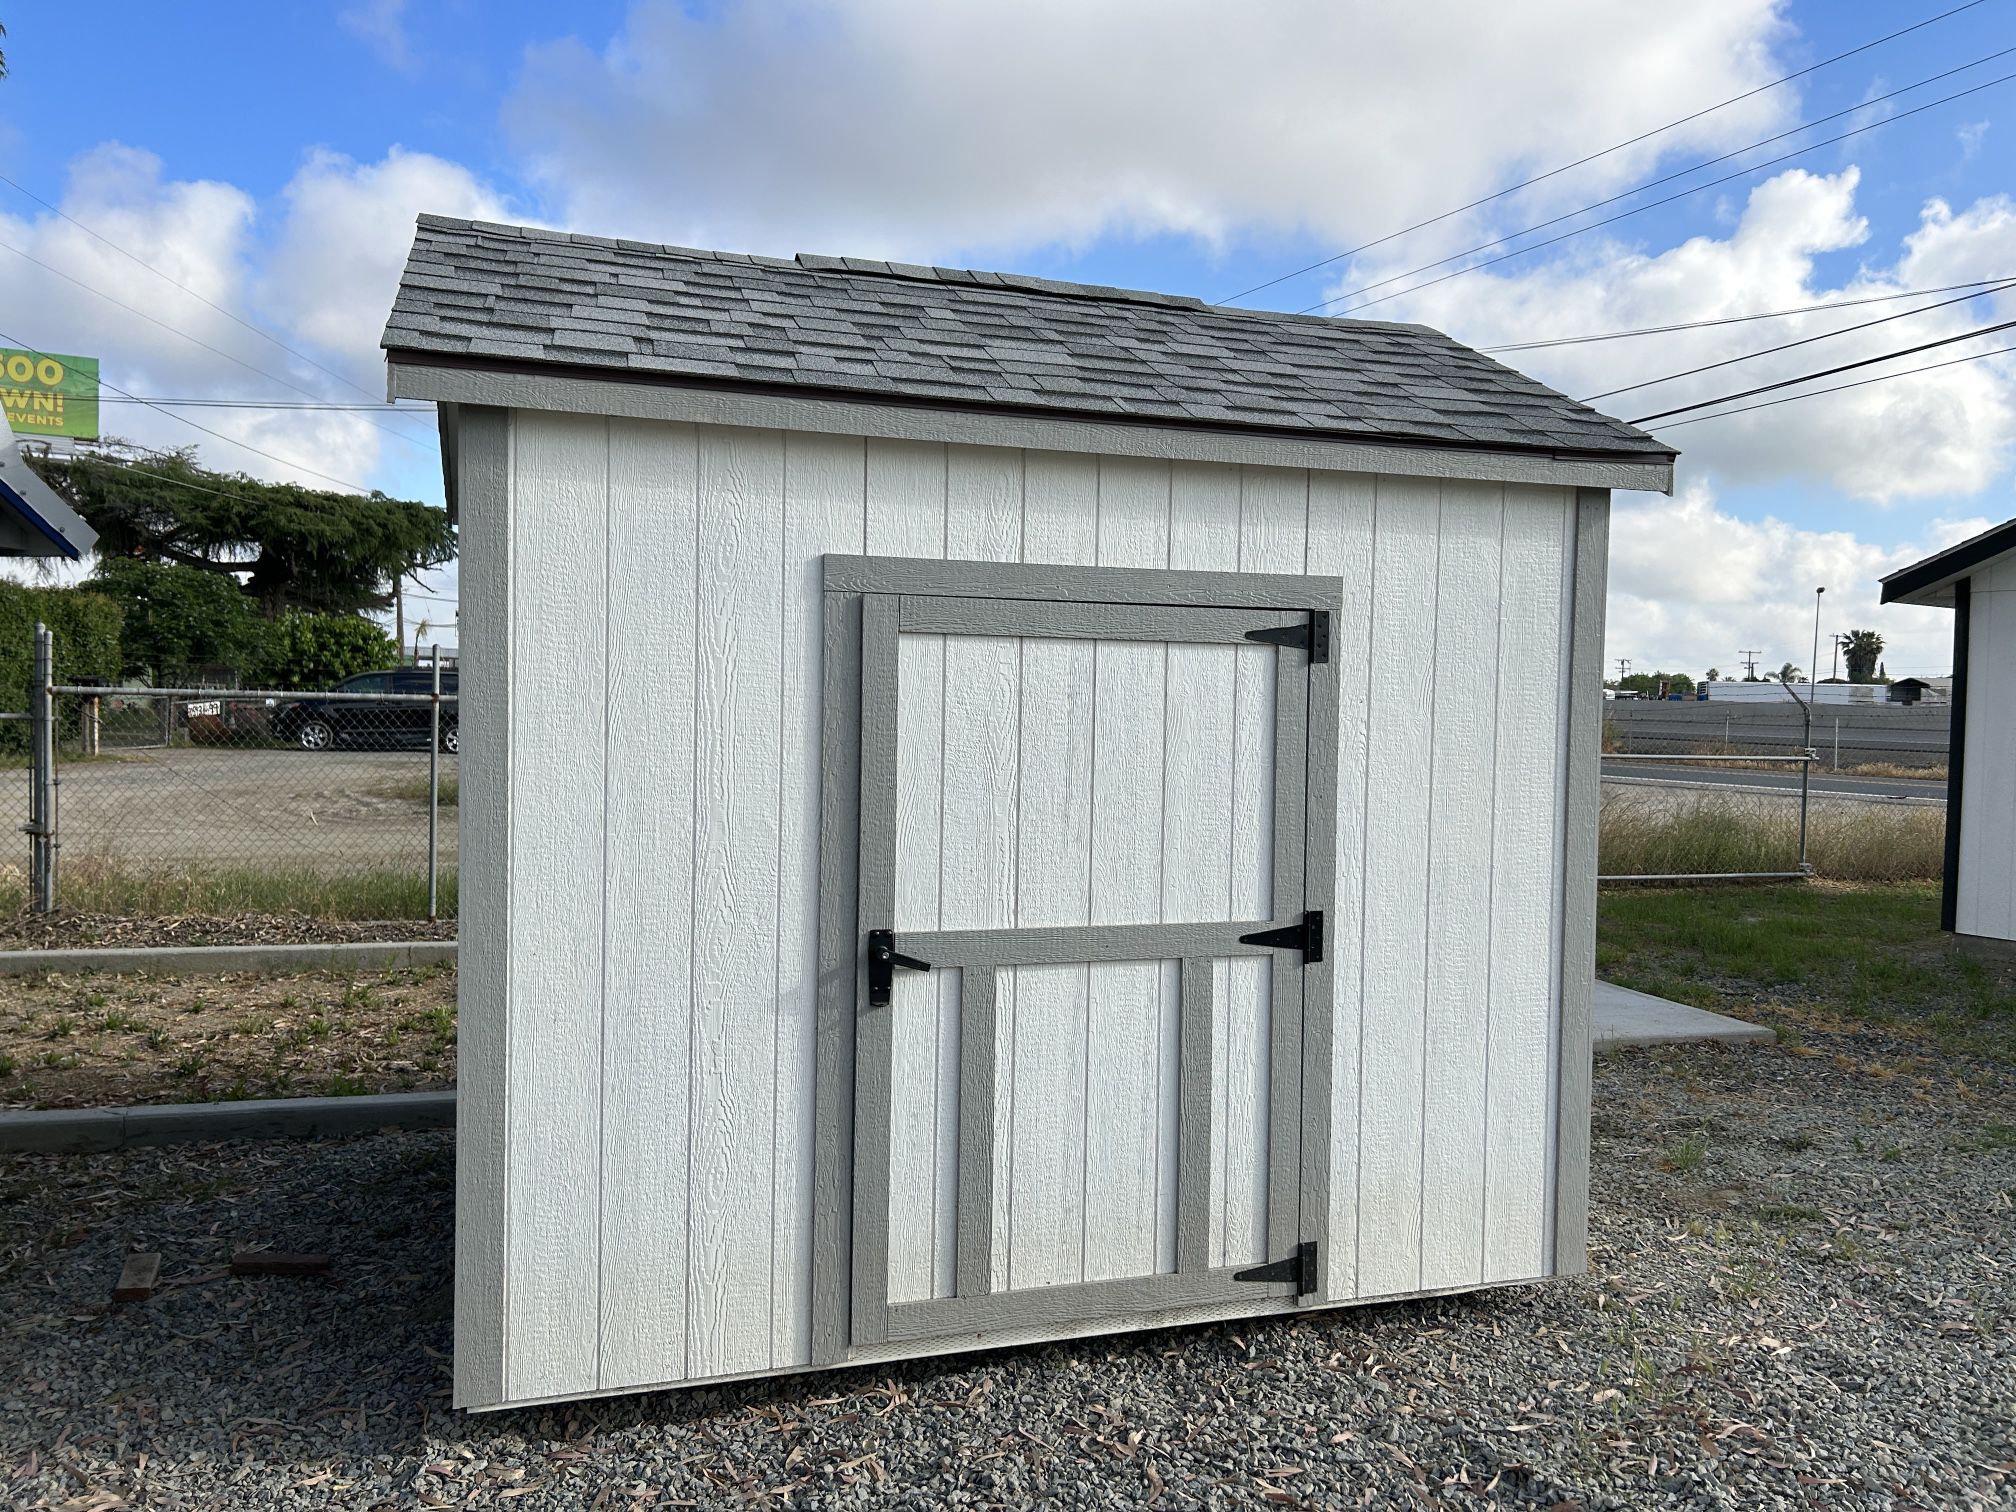 8x10 Shed 